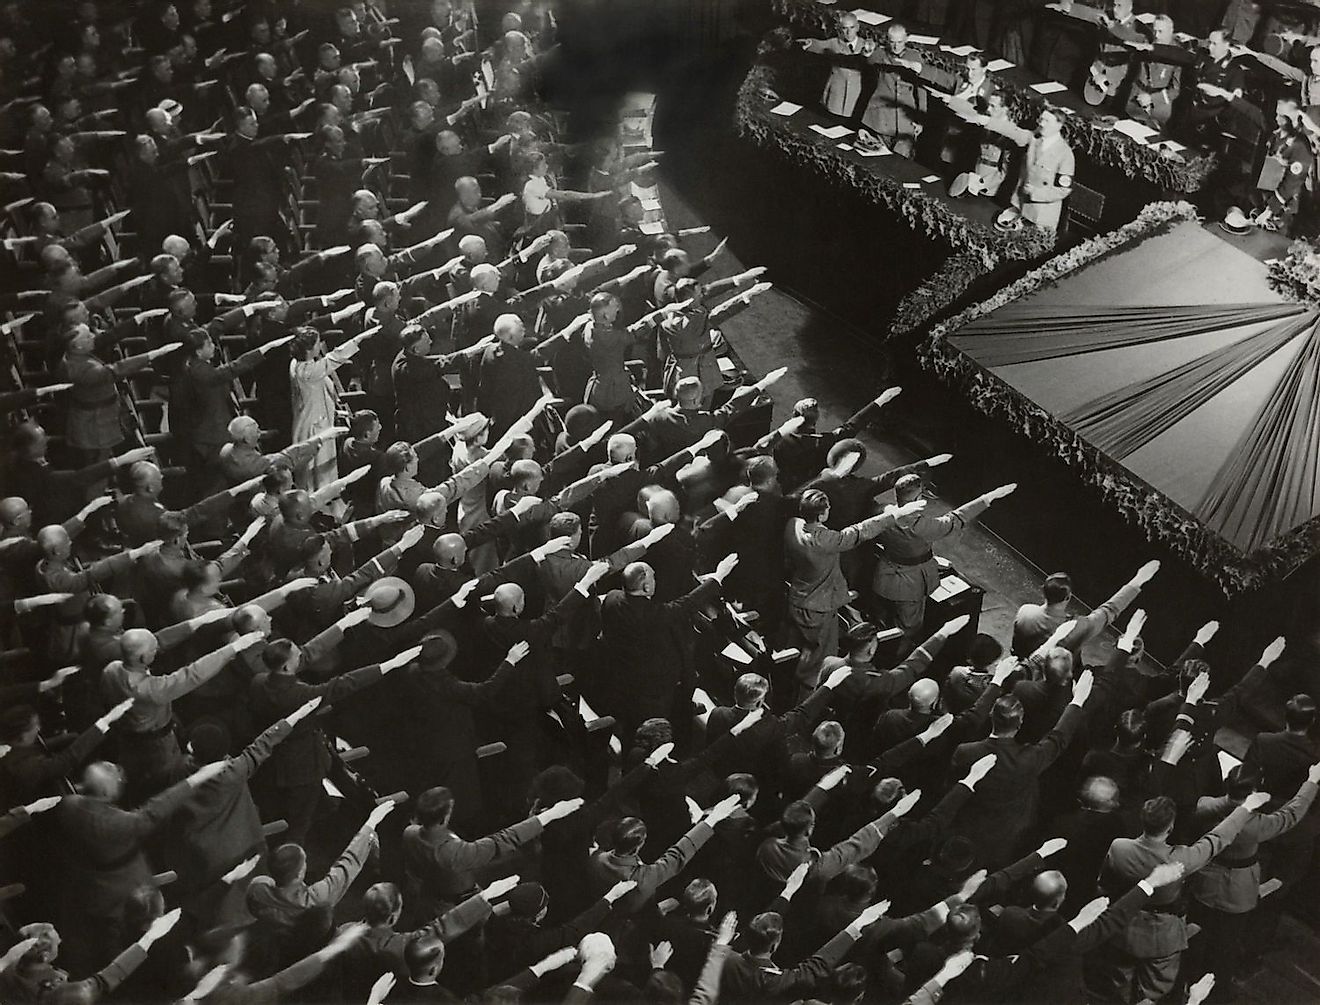 Attendees give Hitler the Nazi salute during the nation anthem, Oct. 9, 1935. They were meeting at the Kroll Opera in Berlin, to organize the Winter Relief festive to help finance charitable work. Image credit: Everett Collection/Shutterstock.com